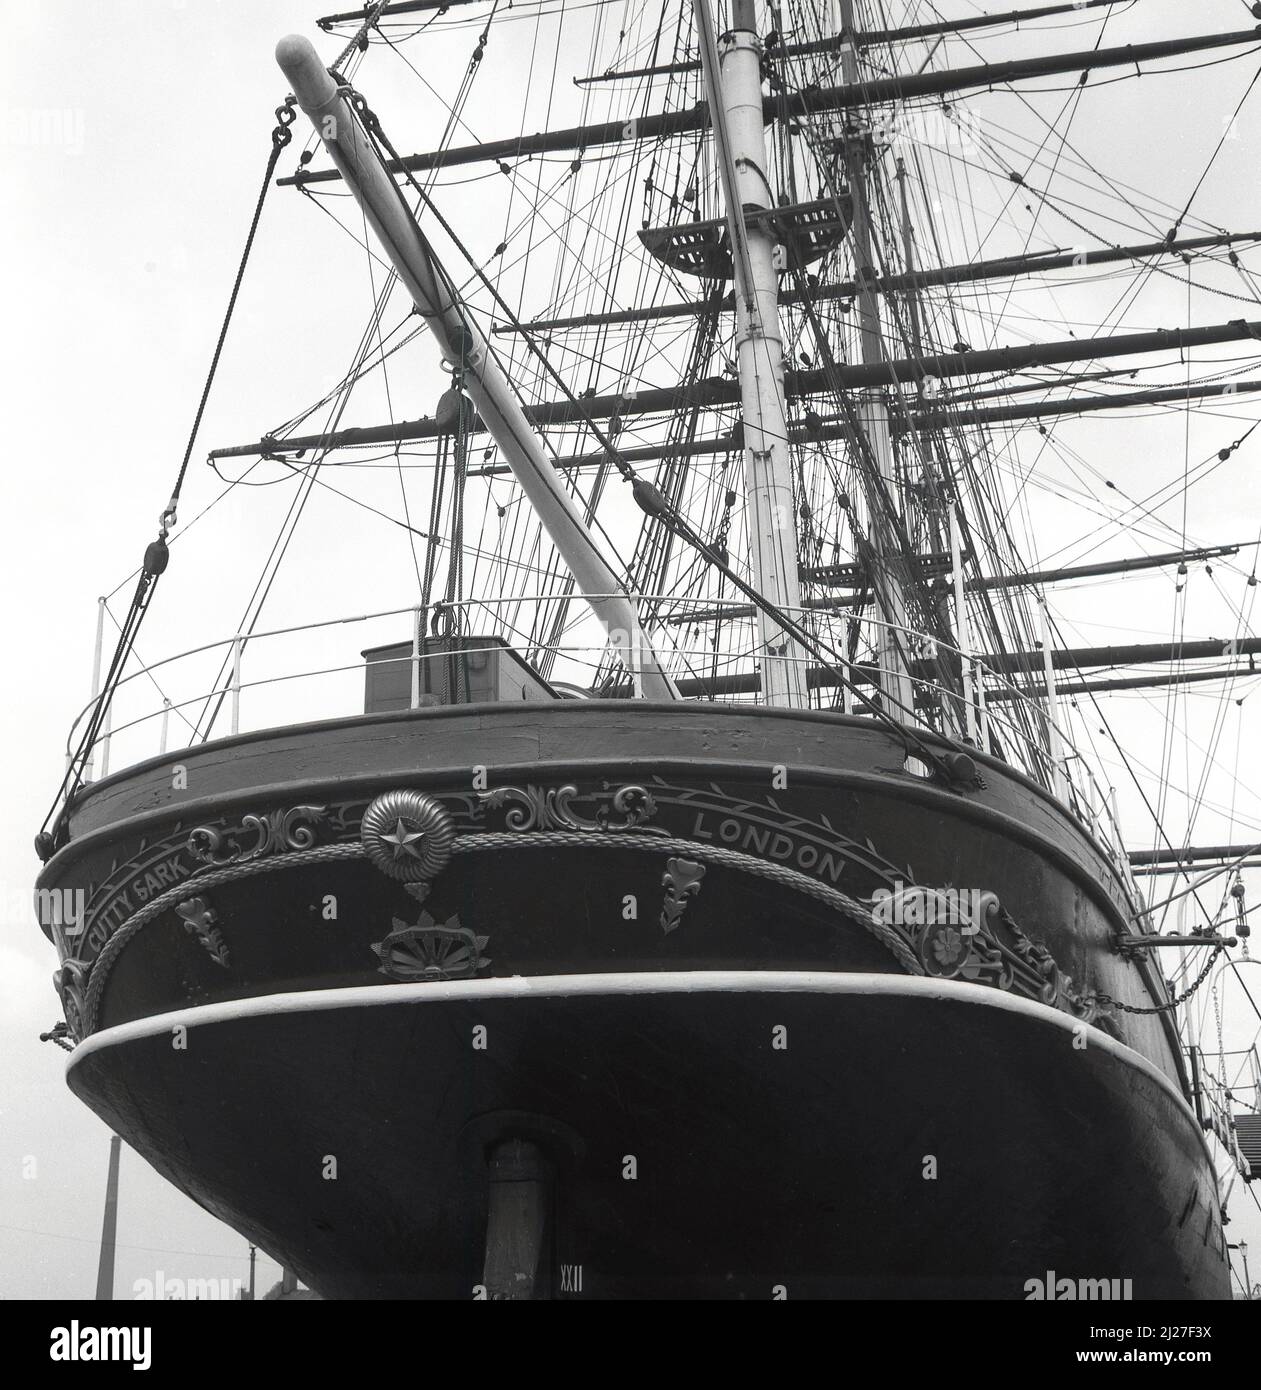 1950s, historical, the rear or stern of the sailing ship, the Cutty Sark, Greenwich, London, England, UK. Built in Scotland in 1869 to carry tea back from China, the three-masted clipper ship was famous for its record-breaking passages. Stock Photo